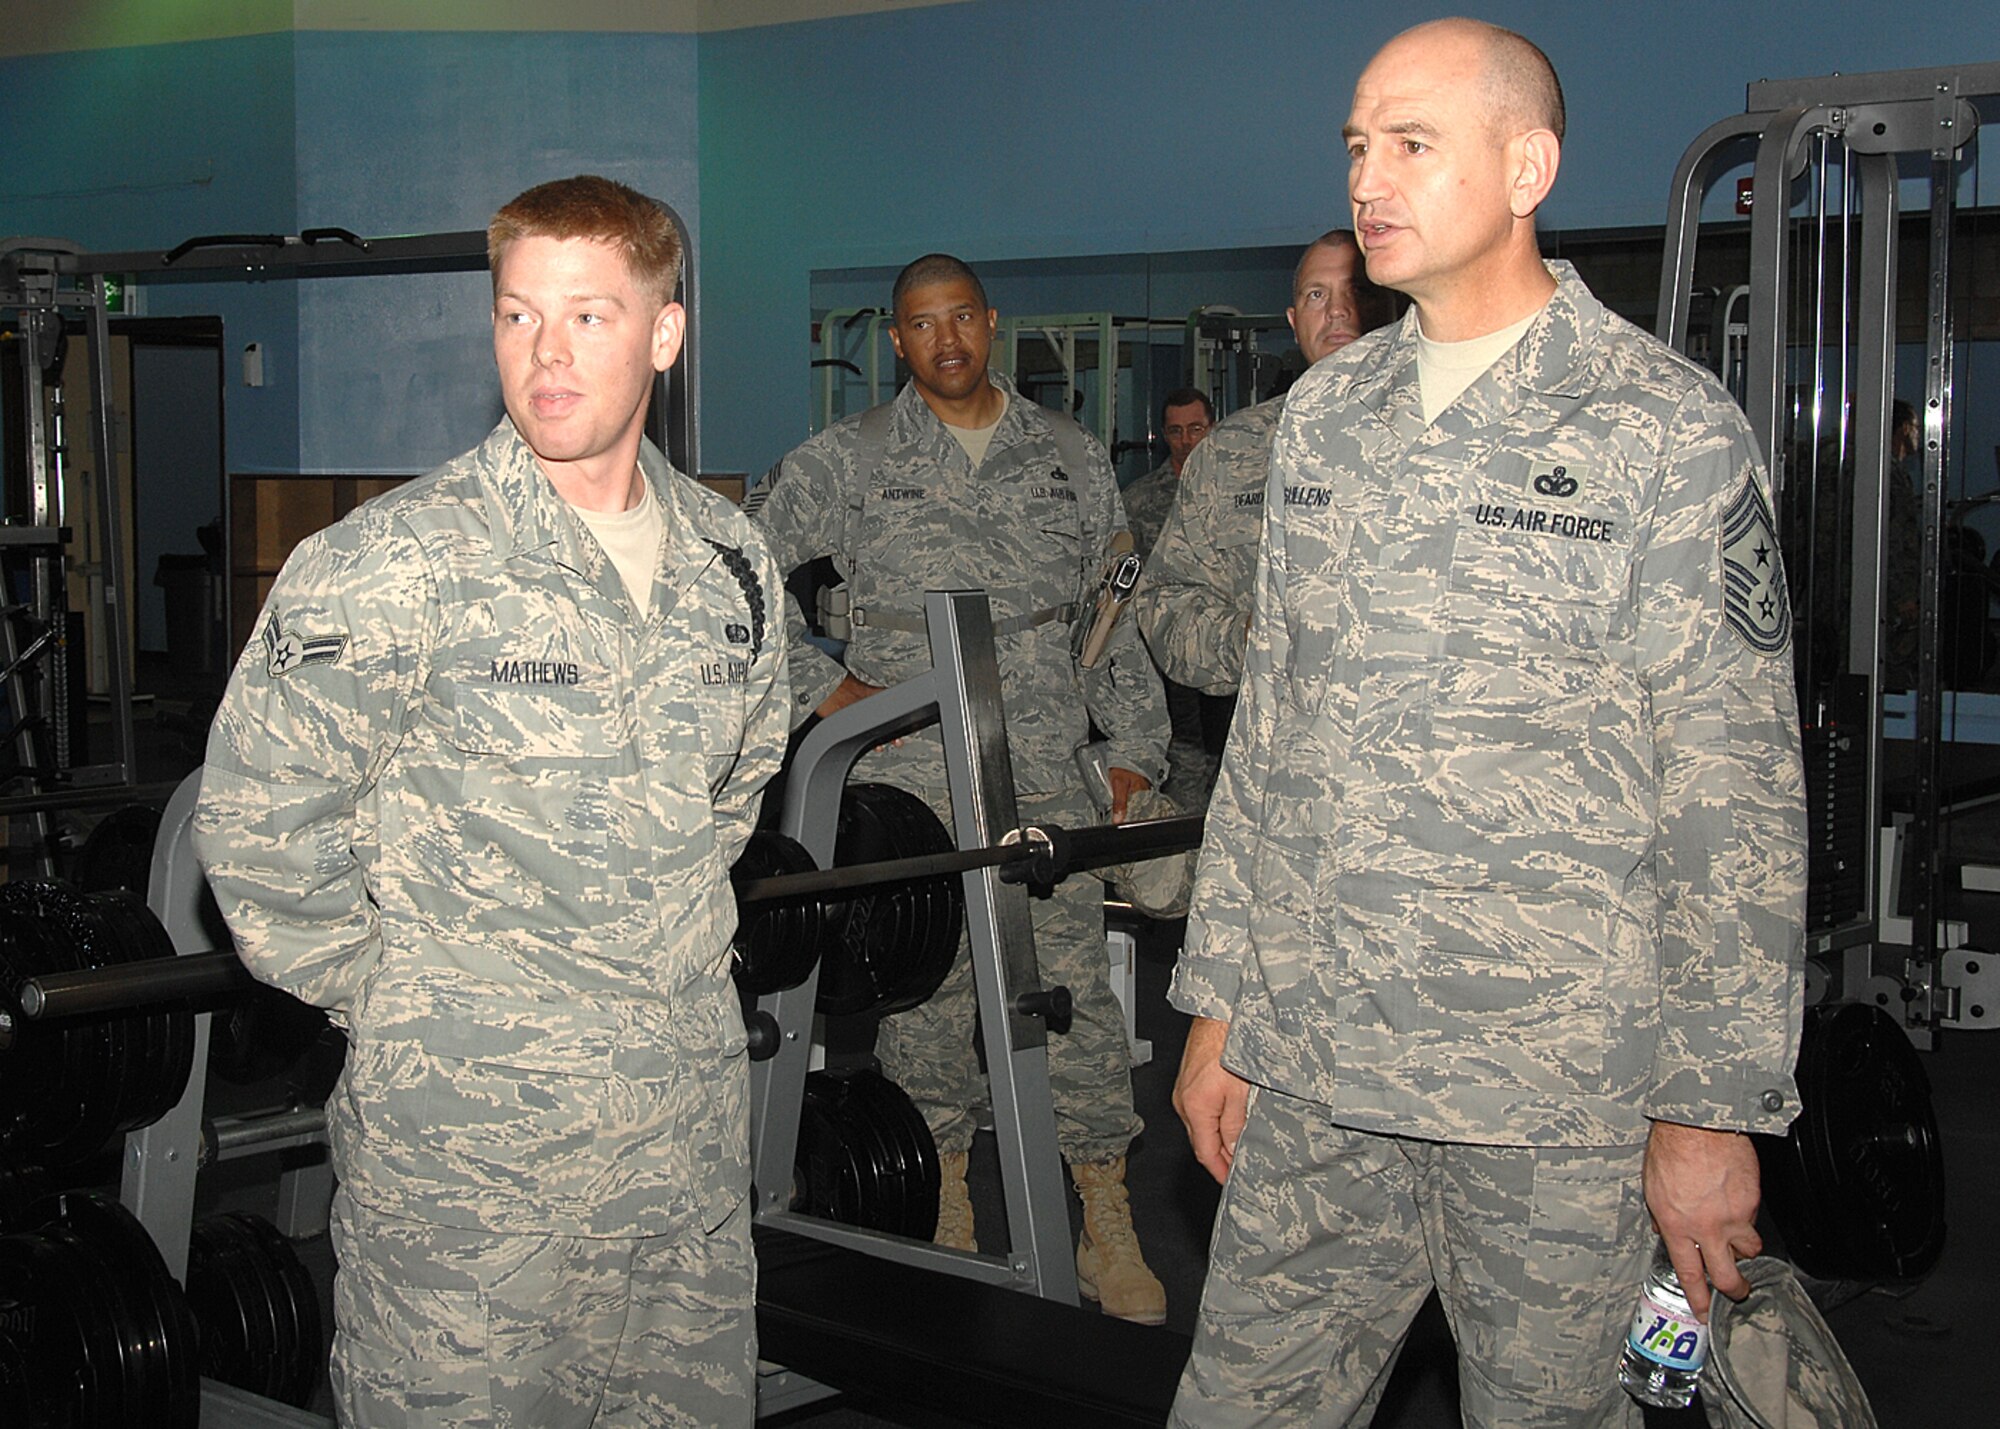 A 386th Expeditionary Wing Airman briefs Chief Master Sgt. Stephen Sullens, Air Combat Command command chief, on the base's fitness programs during the command chief's visit on Nov. 19. Chief Sullens visited with Airmen throughout the U.S. Central Command area of responsibility to see how the mission is progressing, addressing their concerns and thanking them for their service. 